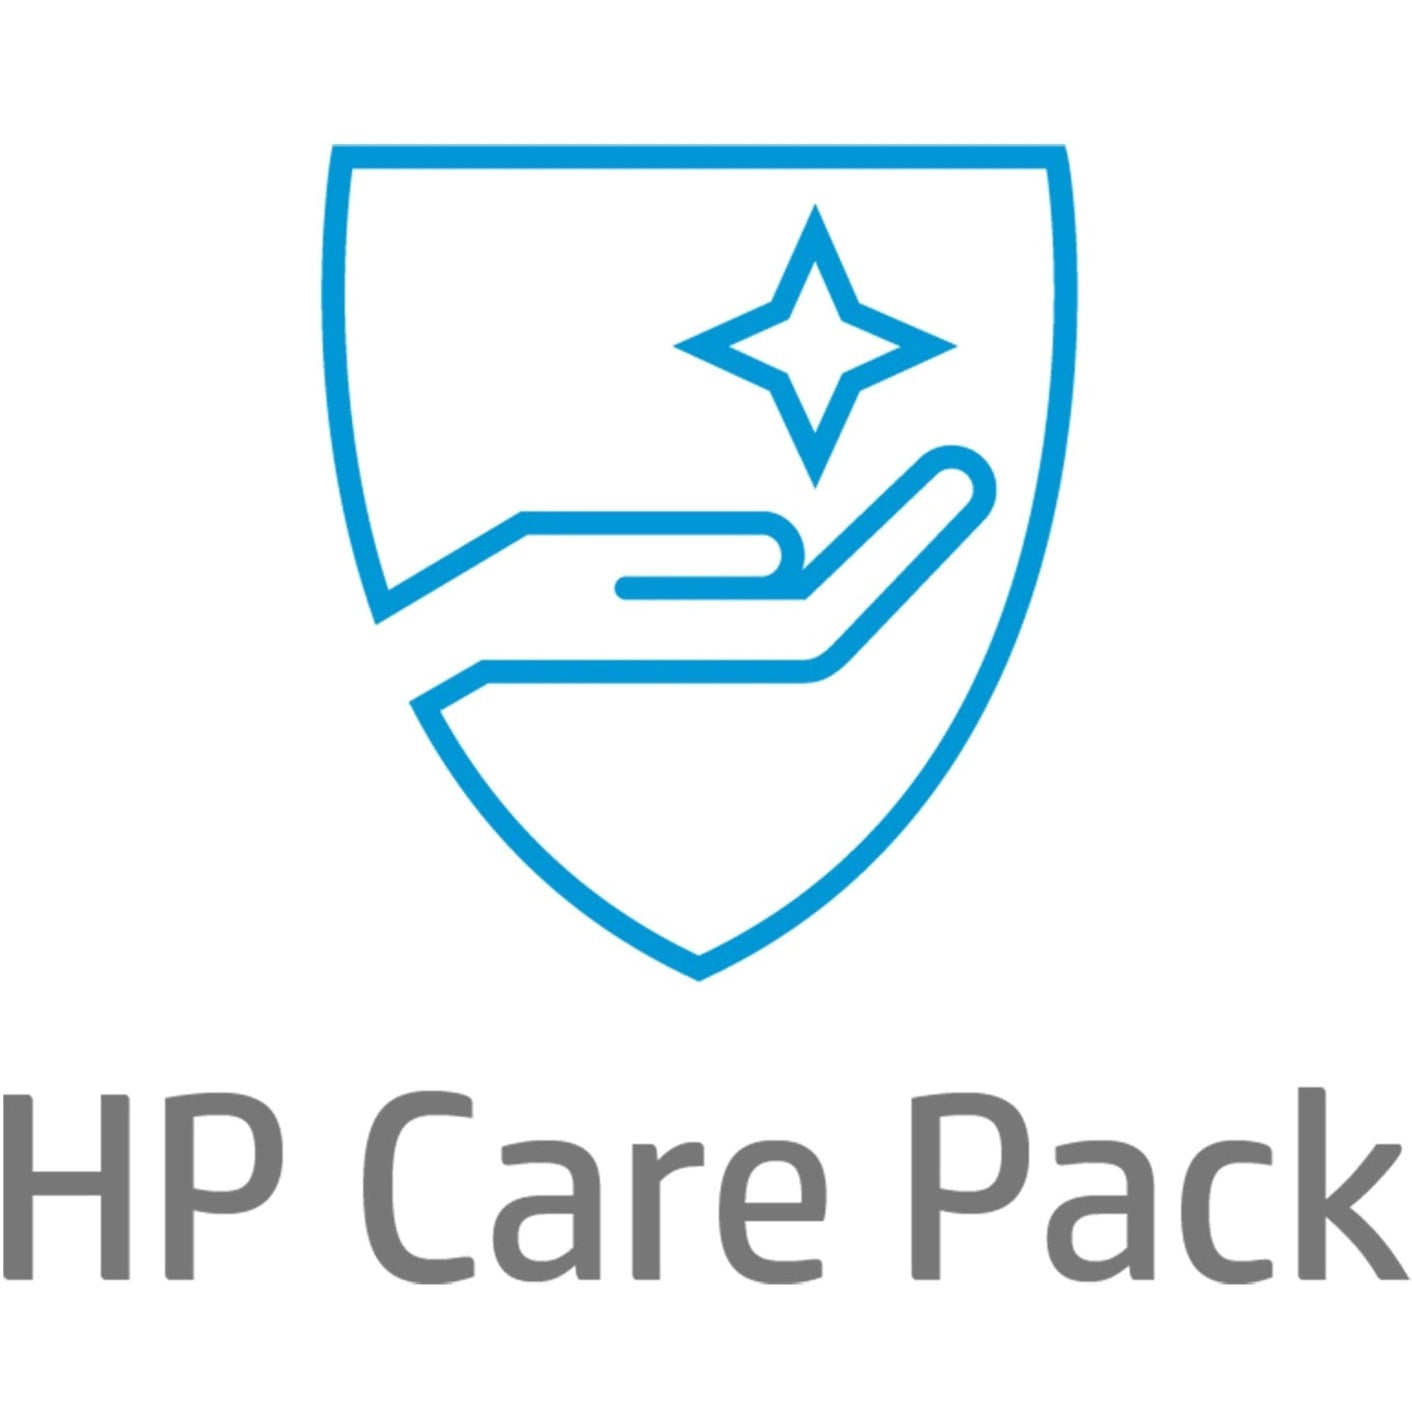 HP Care Pack Hardware Support for Travelers with Defective Media Retention and Accidental Damage Protection - Extended Service - 3 Year - Service (UA6K2E)